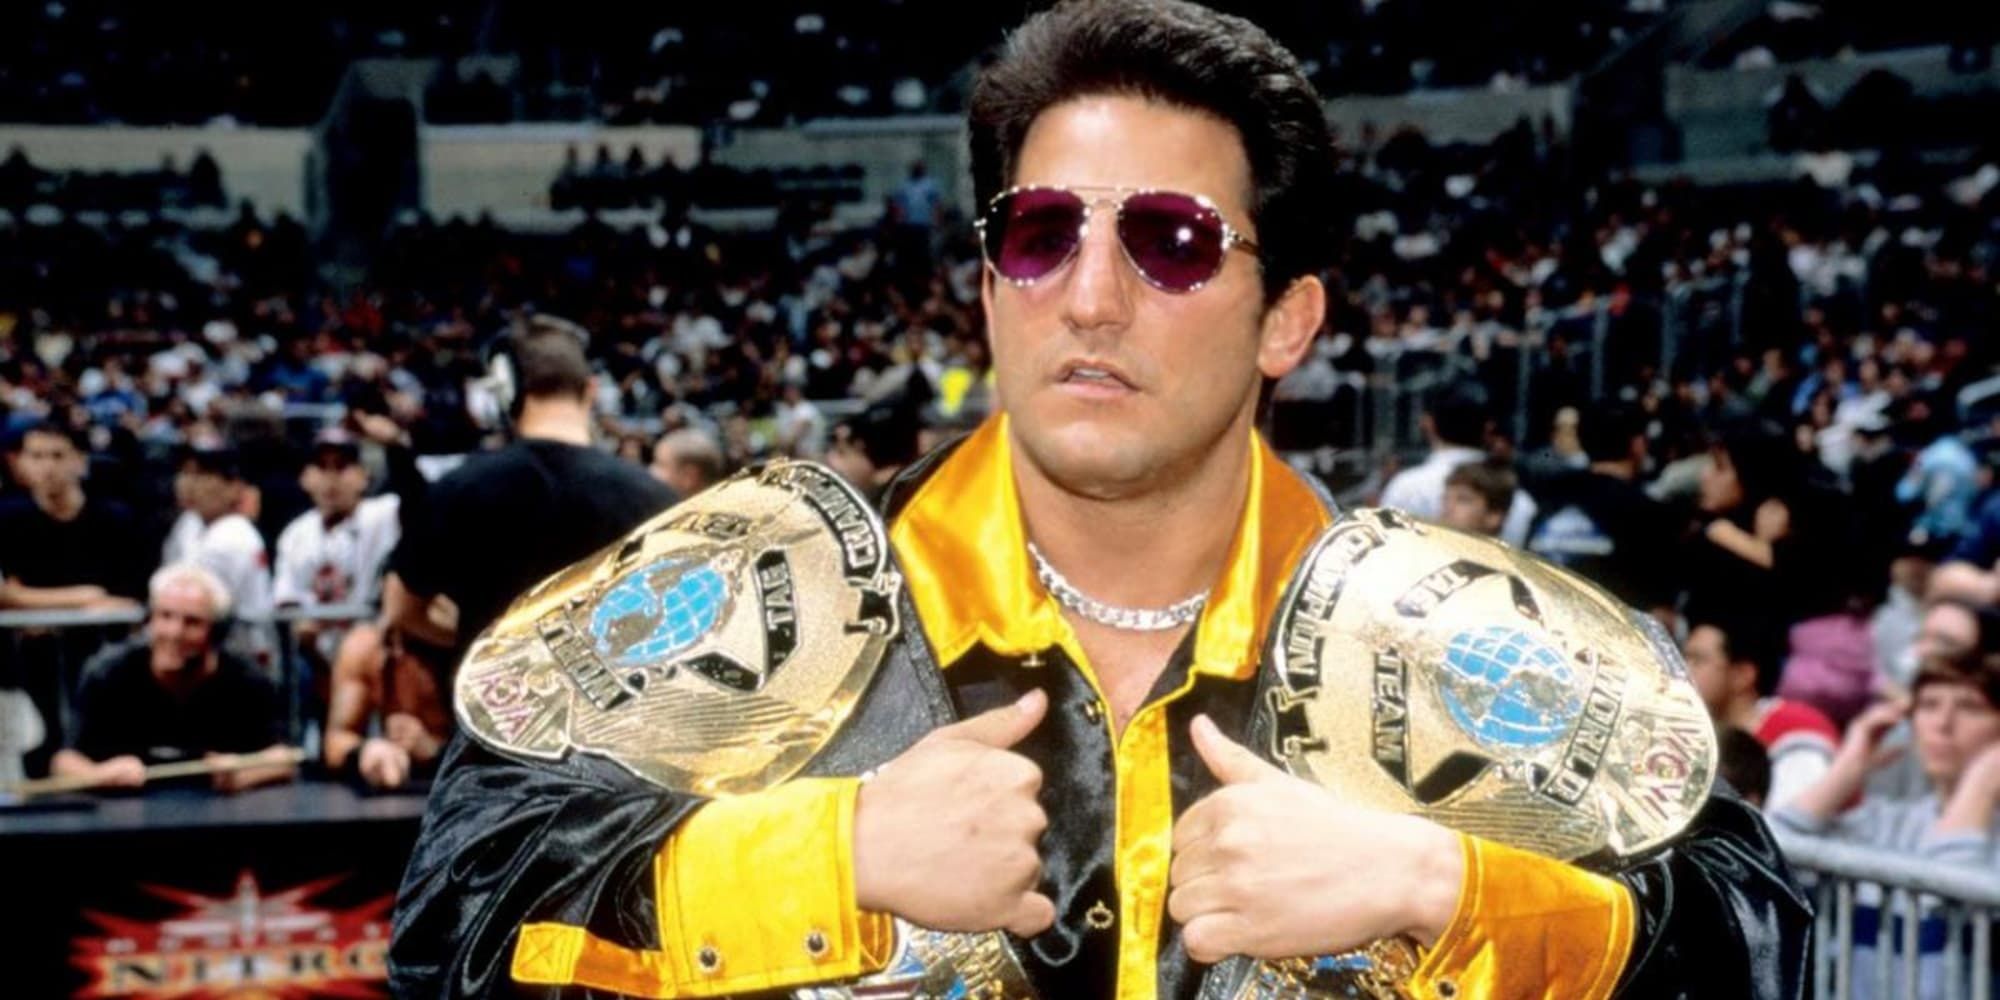 WCW Disco Inferno Holding Two Championship Title Belts At Ringside